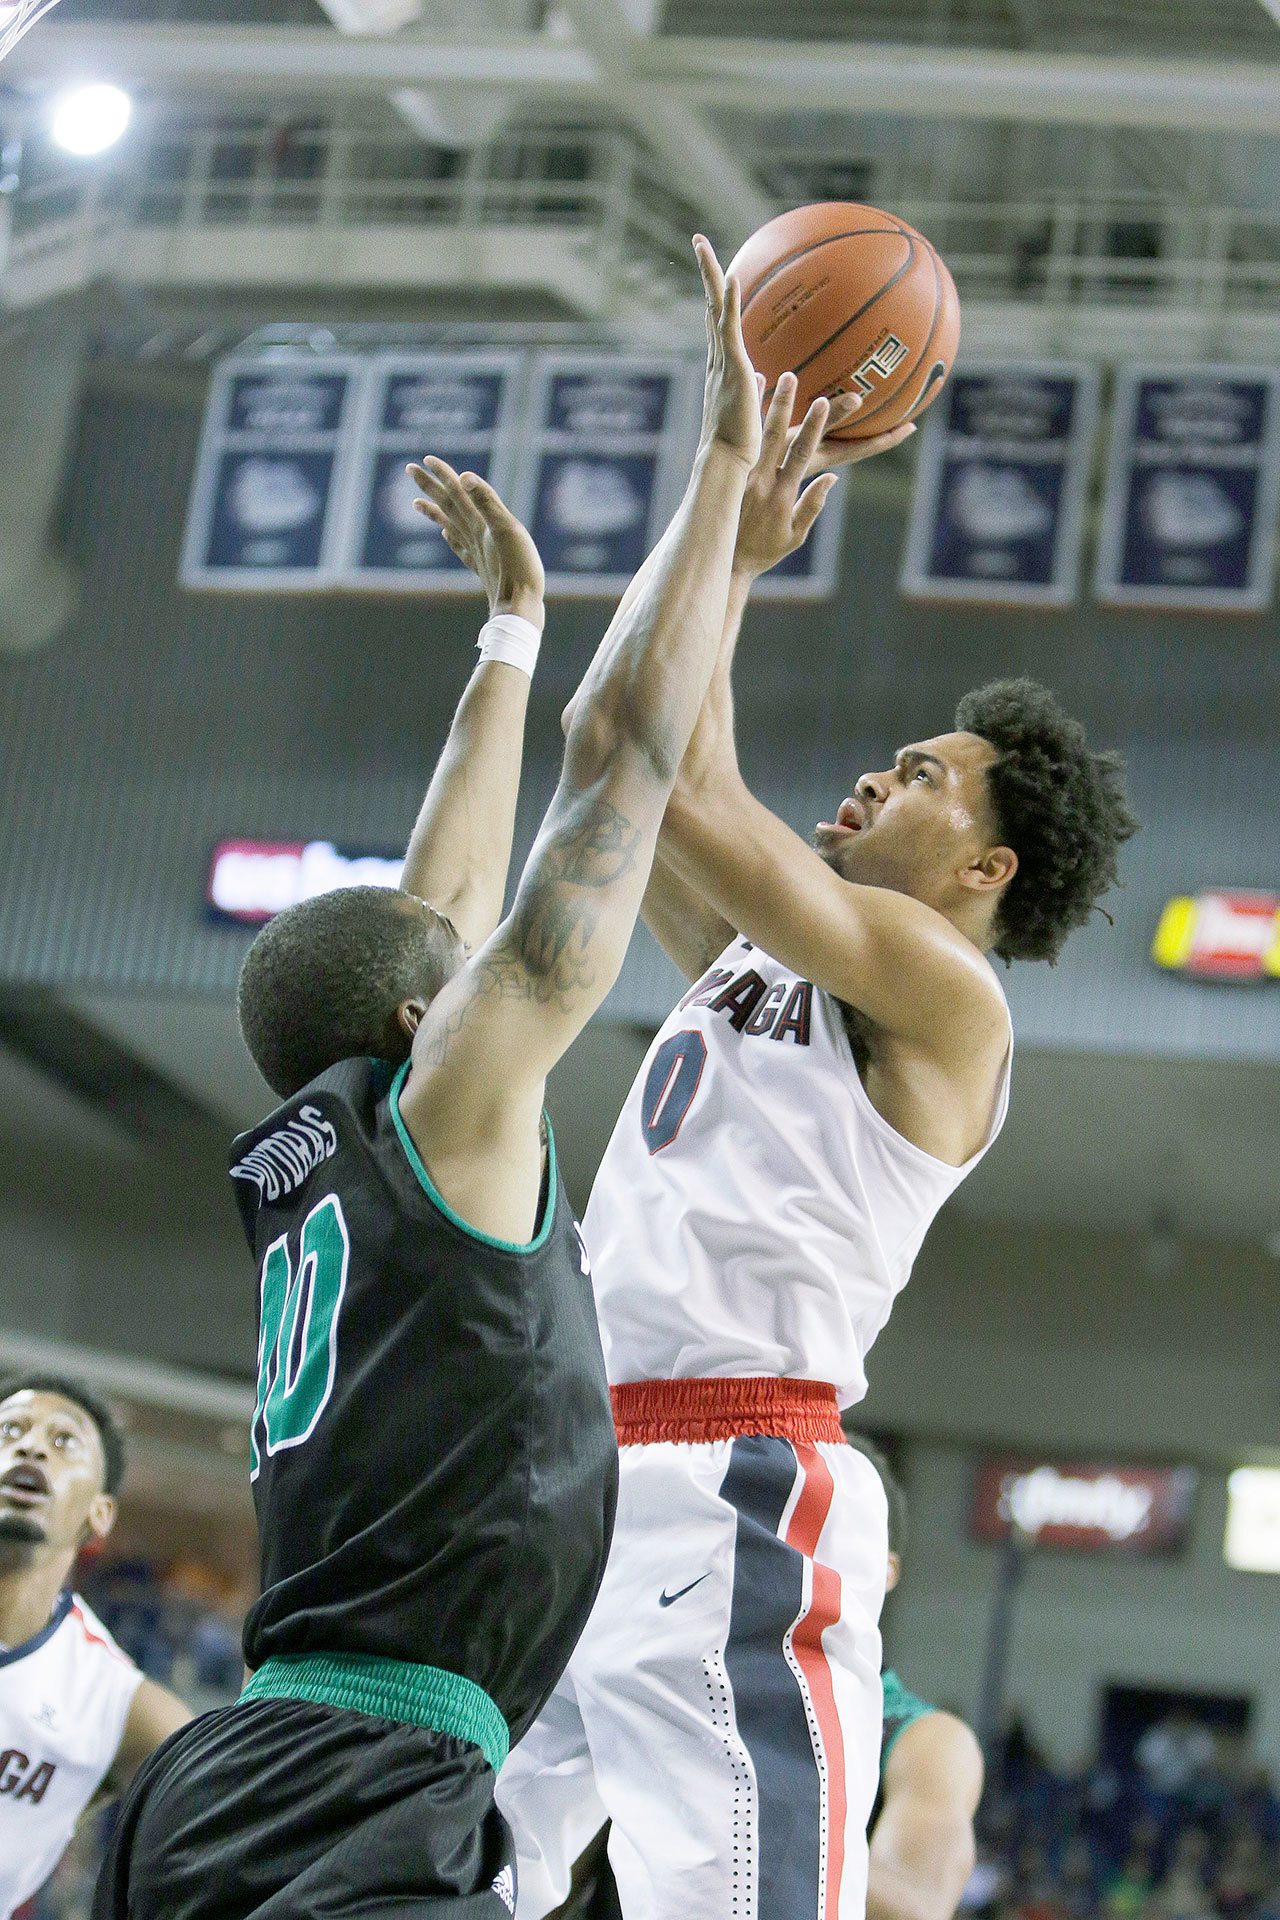 Gonzaga’s Silas Melson (0) rises to shoot as Utah Valley’s Jordan Poydras defends during the Bulldogs’ 92-69 win over the Wolverines on Friday in Spokane. (AP Photo/Young Kwak)